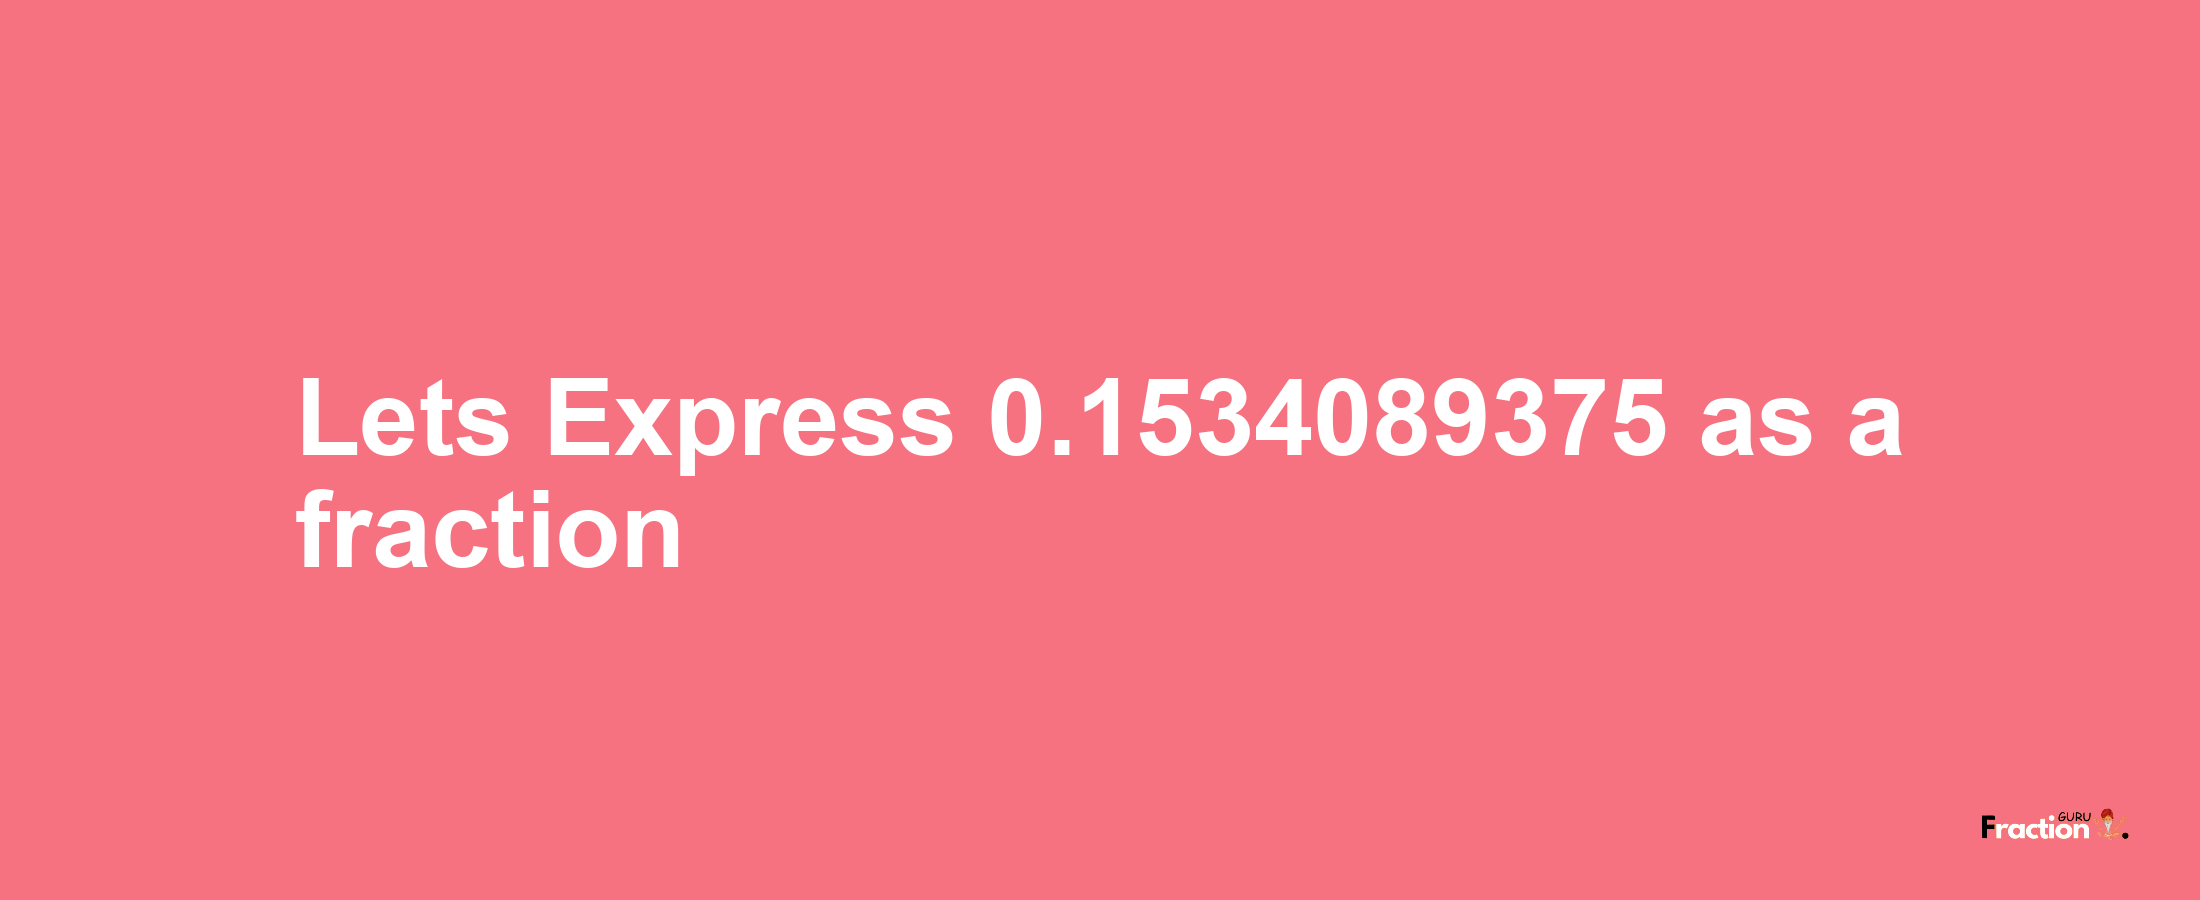 Lets Express 0.1534089375 as afraction